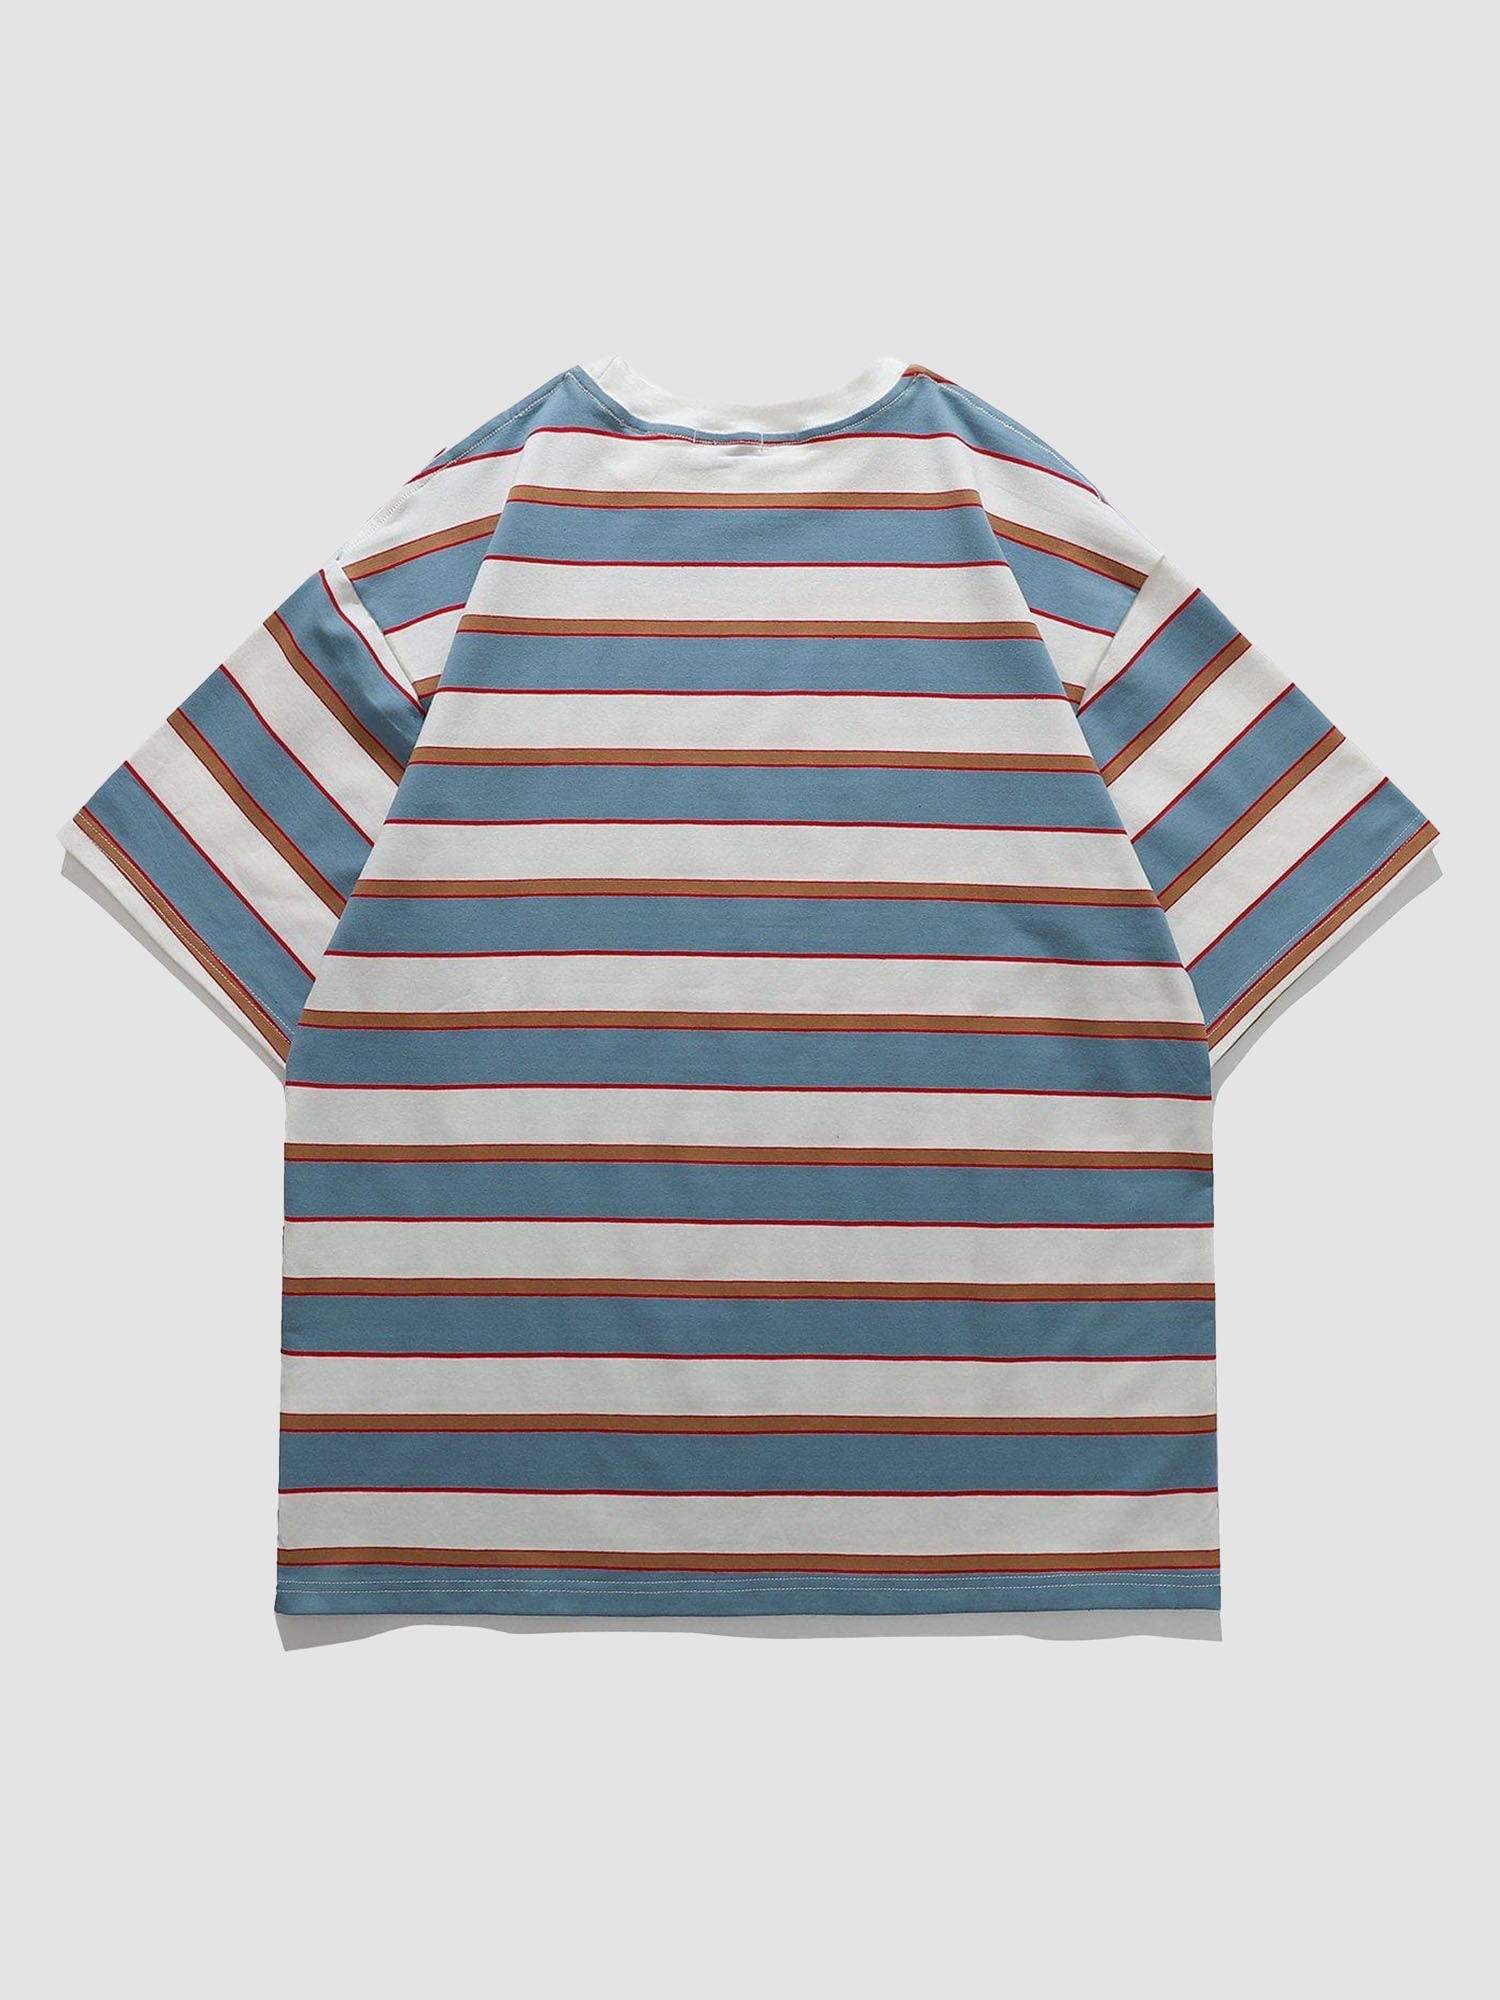 JUSTNOTAG Embroidered Striped Panel Short Sleeve Tee